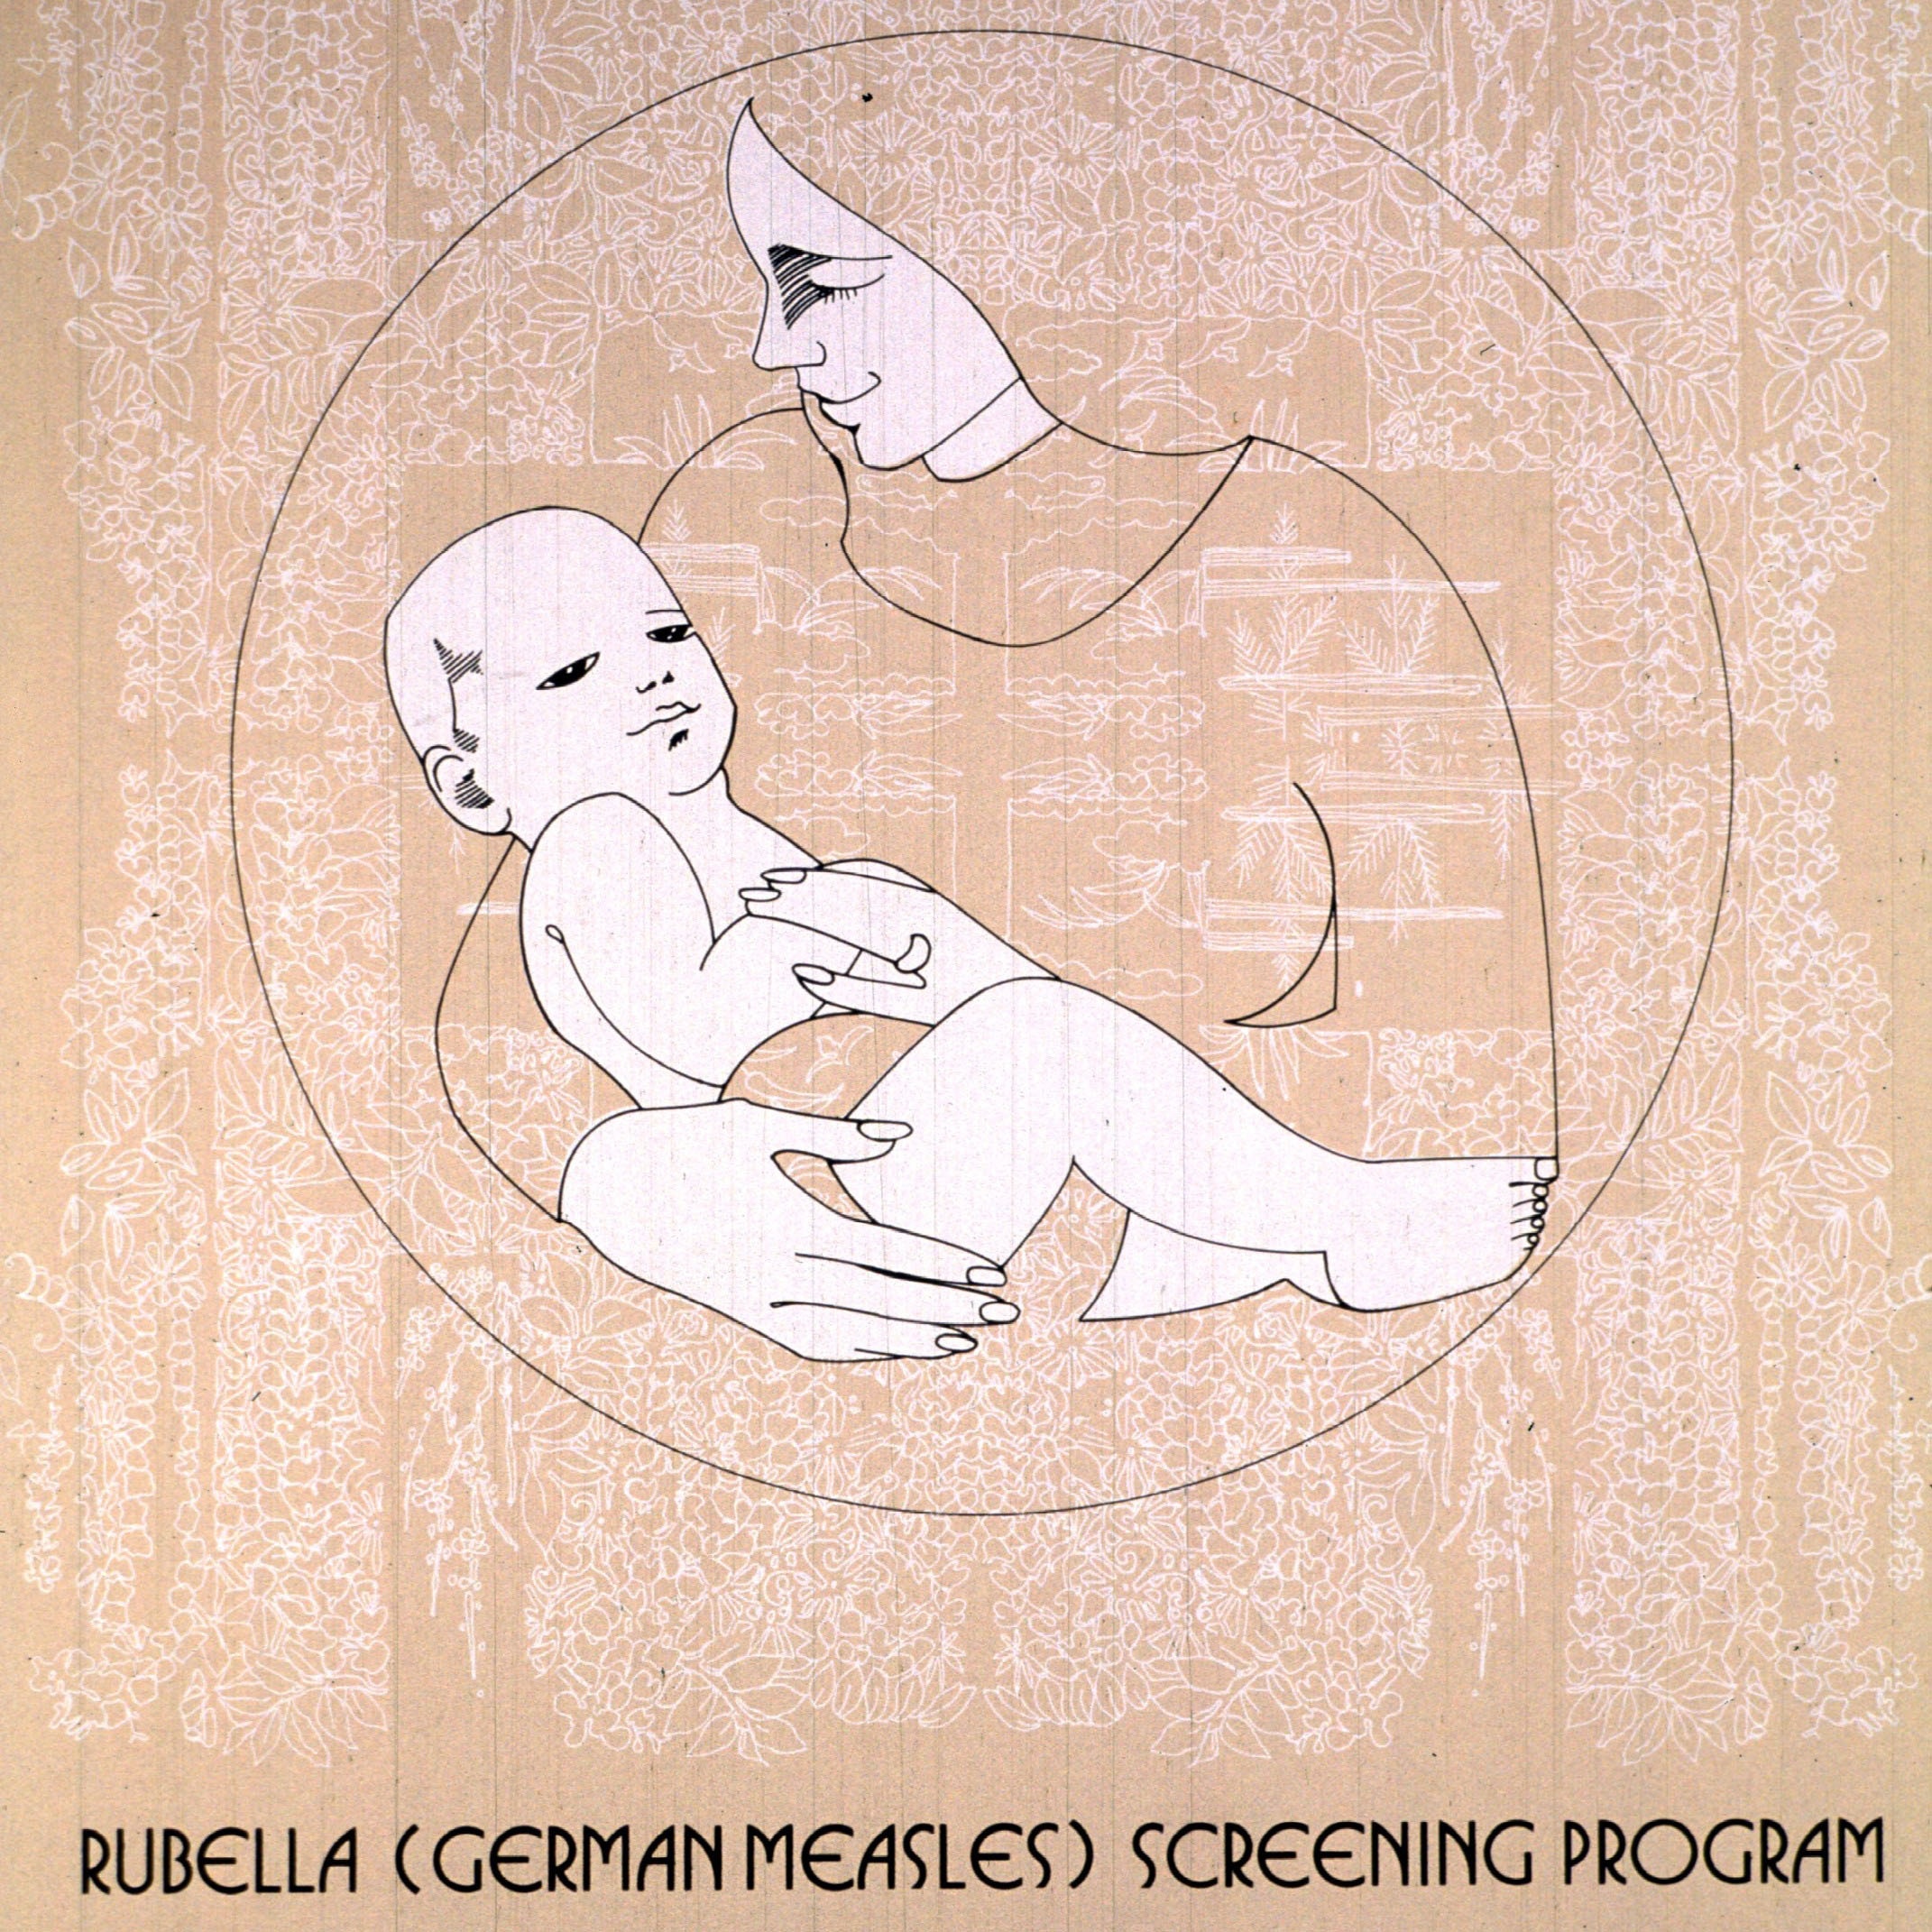 a poster with an Art Deco style image of a mother and baby that advertises a rubella screening program for women